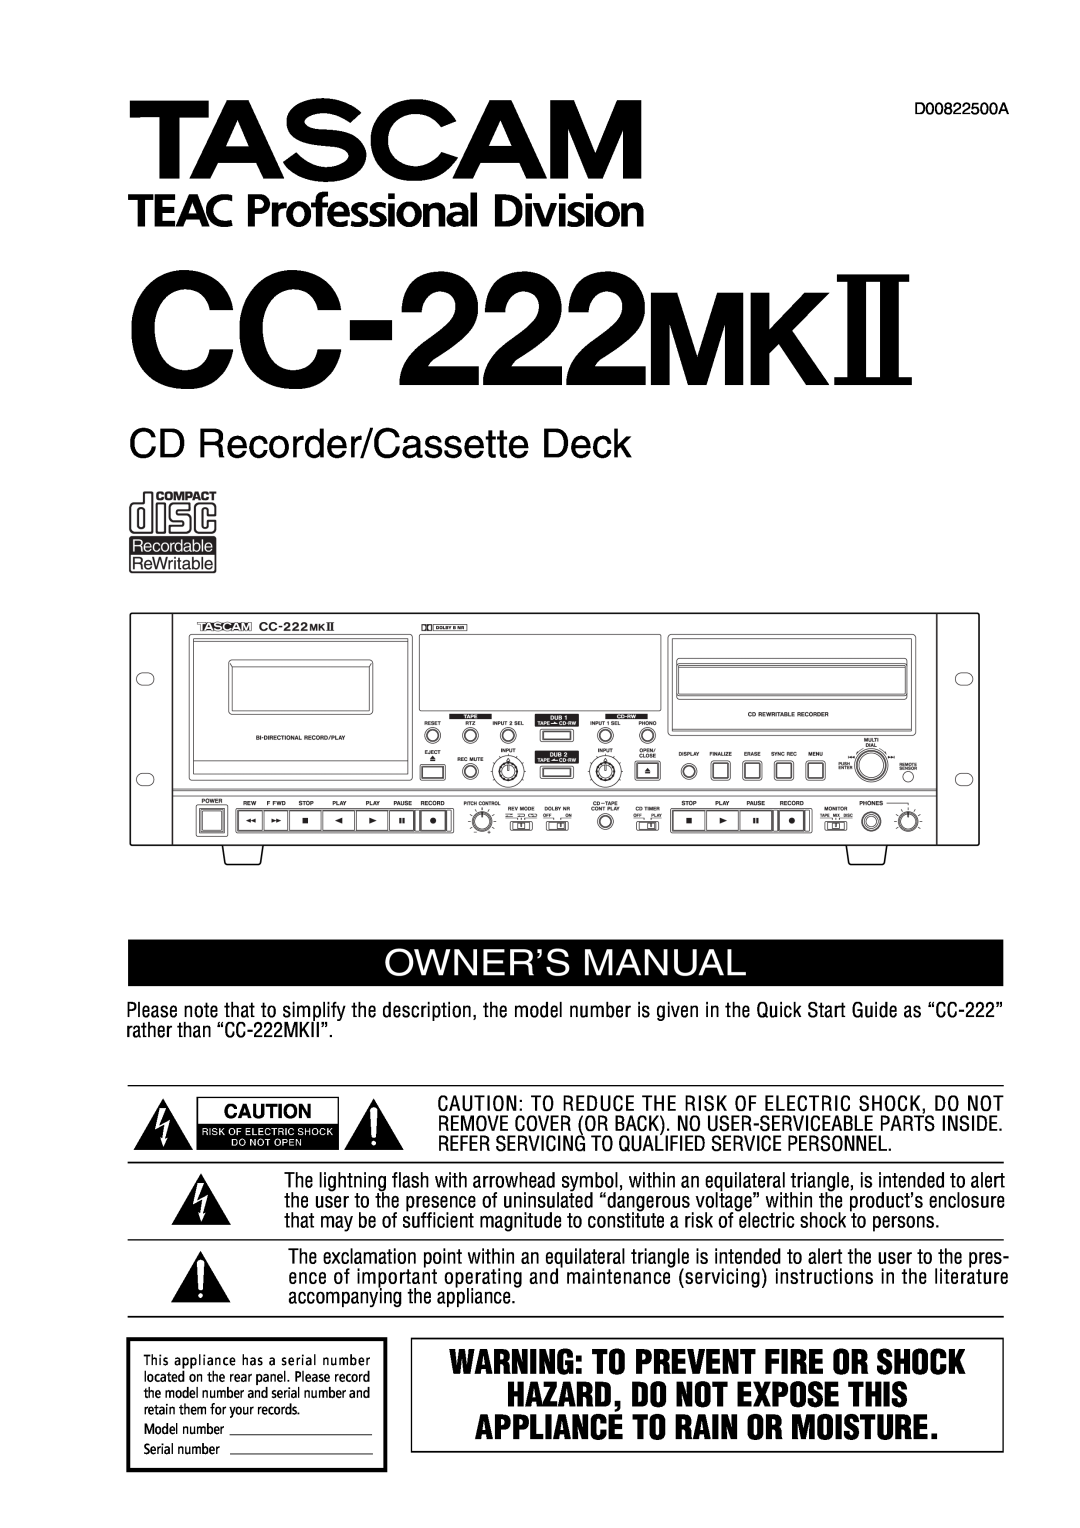 Tascam specifications Tascam CC-222MKII, 3/18/2005, Page 1 of, Main Features, Specifications, CD Recorder/Cassette Deck 